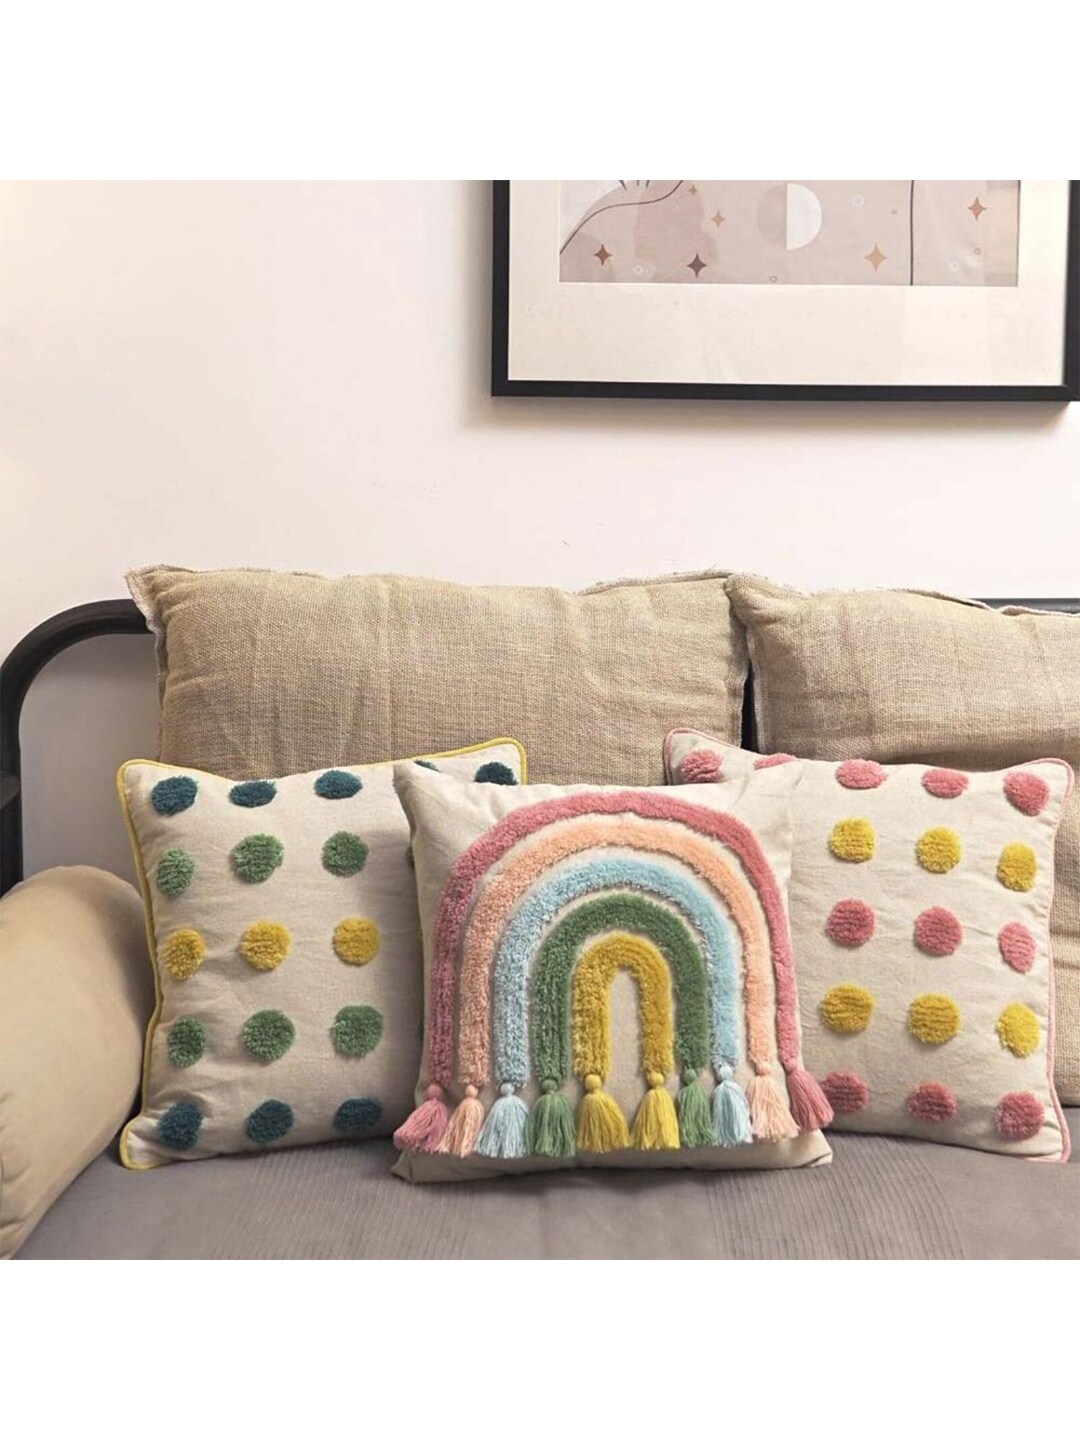 haus & kinder Pink Square Cushion Covers Price in India